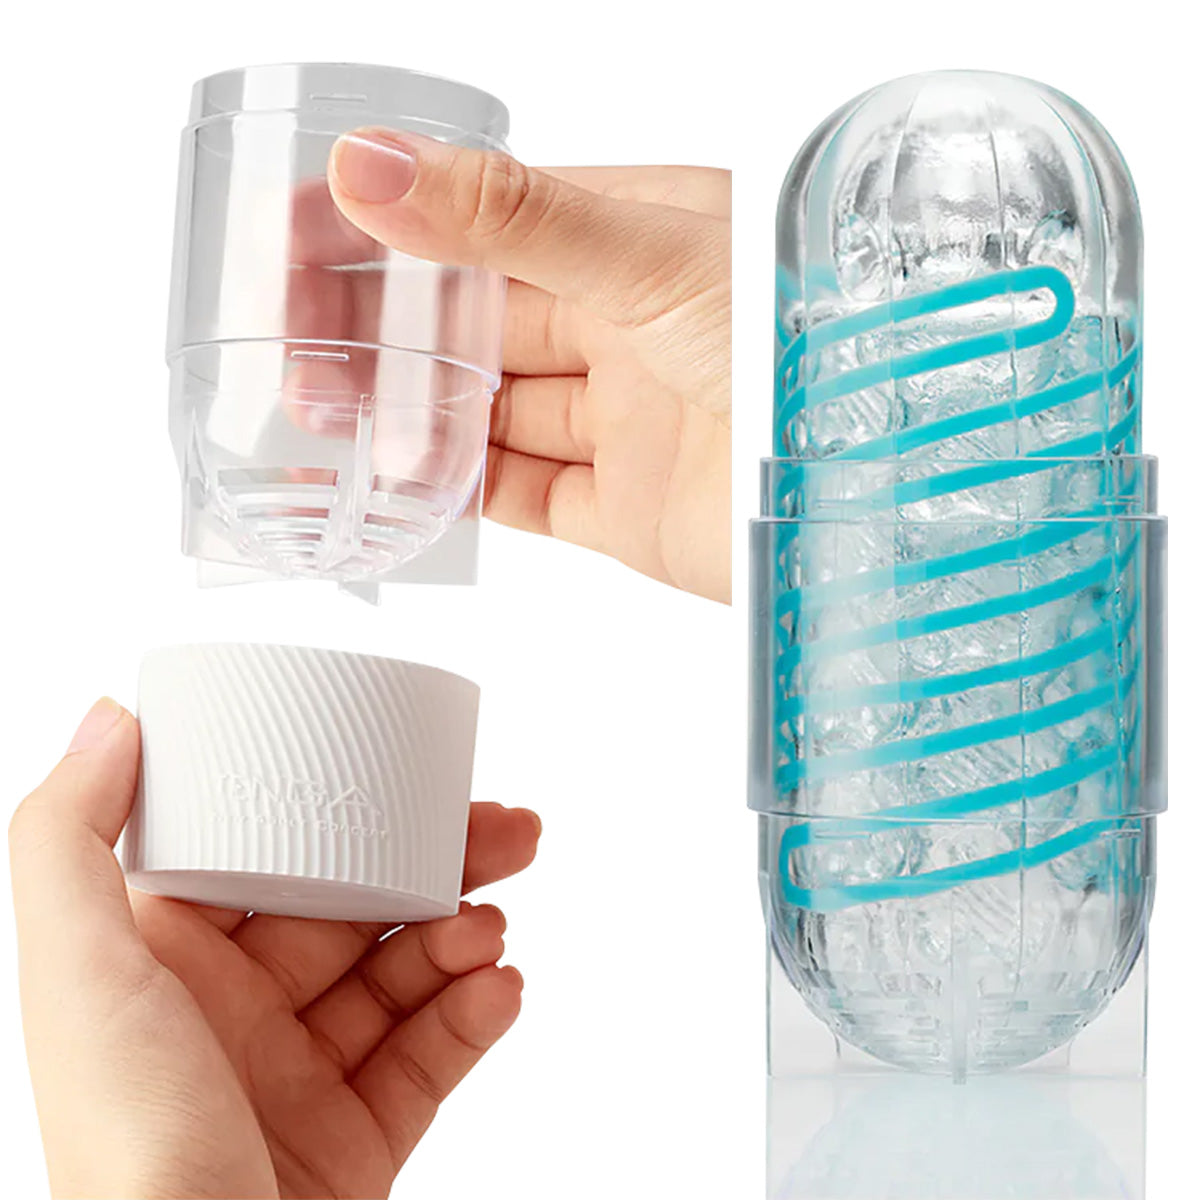 Tenga Spinner has a handy storage and drying case